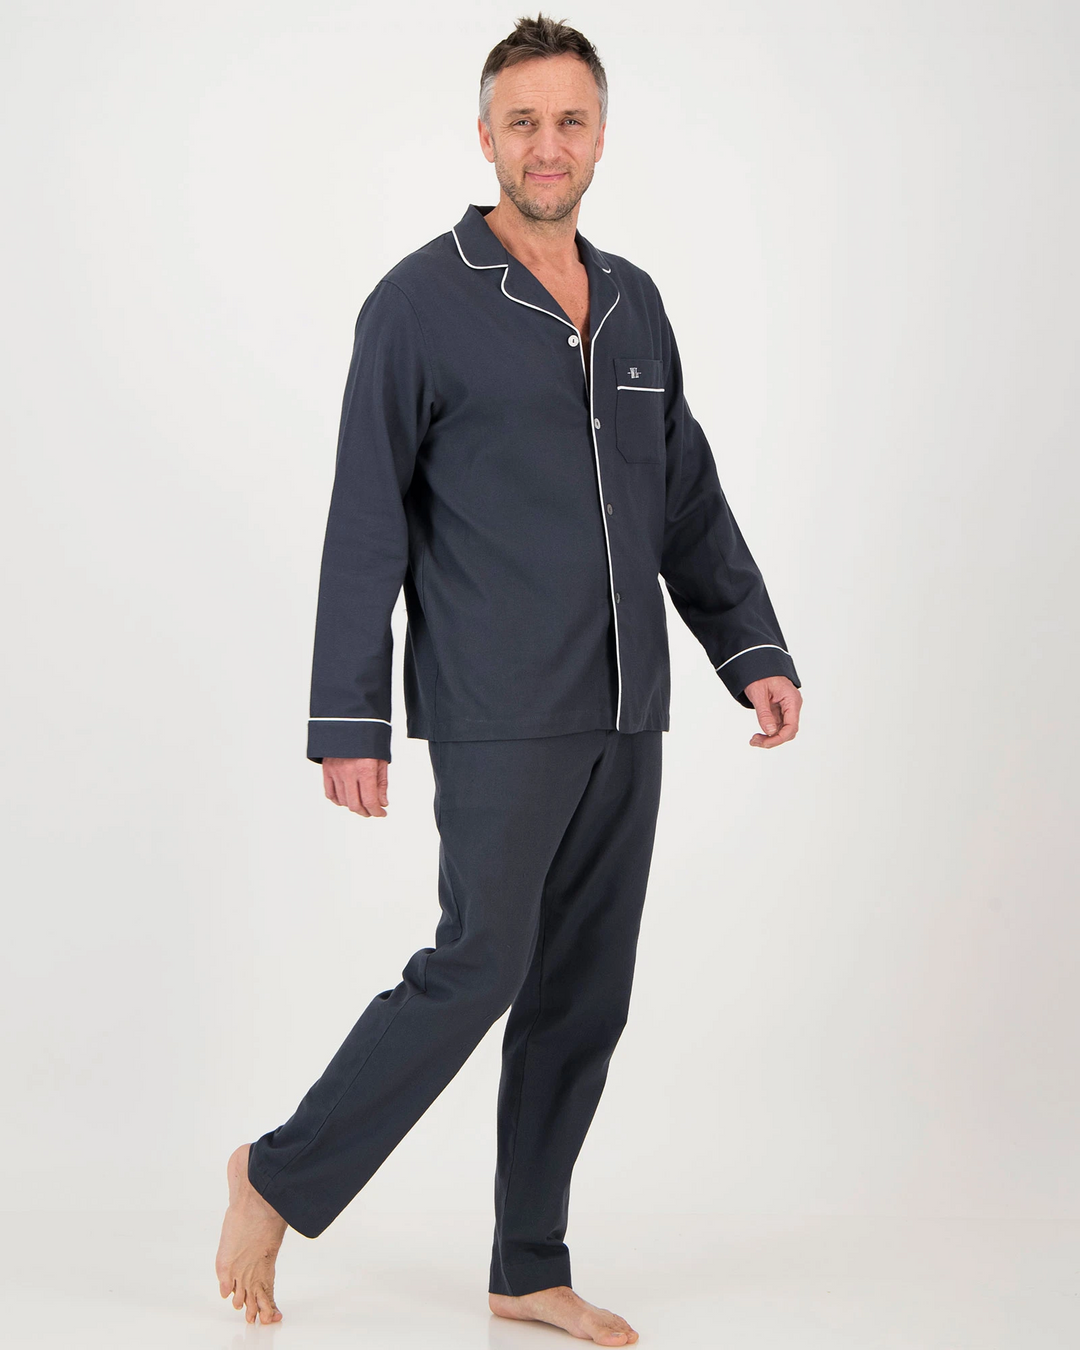 Mens Long Pyjamas - Flannel Charcoal with White Piping